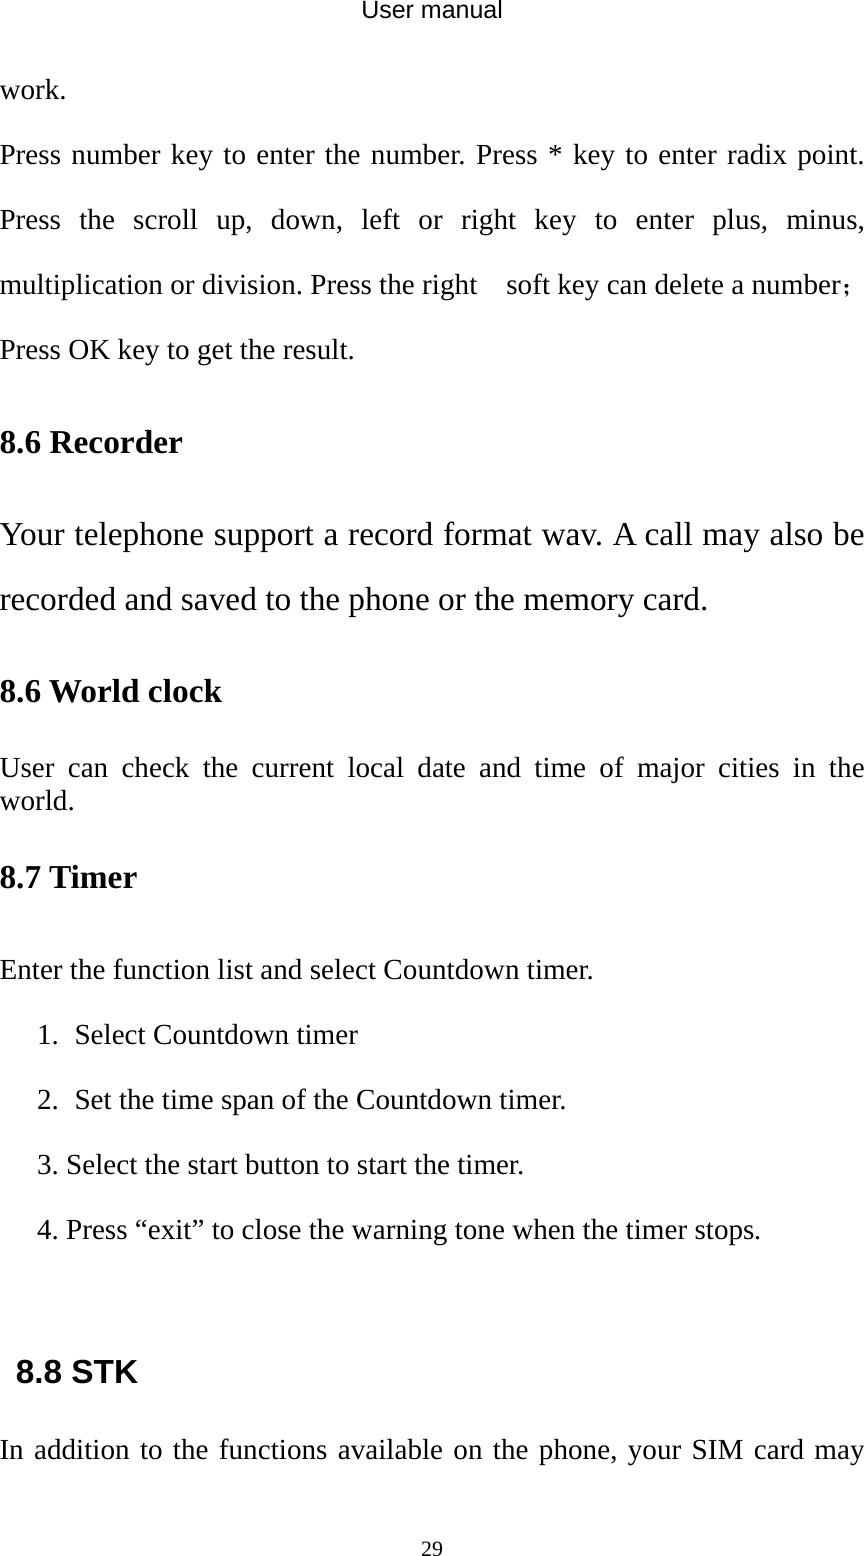 User manual  29work. Press number key to enter the number. Press * key to enter radix point. Press the scroll up, down, left or right key to enter plus, minus, multiplication or division. Press the right    soft key can delete a number；Press OK key to get the result. 8.6 Recorder Your telephone support a record format wav. A call may also be recorded and saved to the phone or the memory card. 8.6 World clock User can check the current local date and time of major cities in the world. 8.7 Timer Enter the function list and select Countdown timer. 1. Select Countdown timer   2. Set the time span of the Countdown timer. 3. Select the start button to start the timer. 4. Press “exit” to close the warning tone when the timer stops.  8.8 STK In addition to the functions available on the phone, your SIM card may 